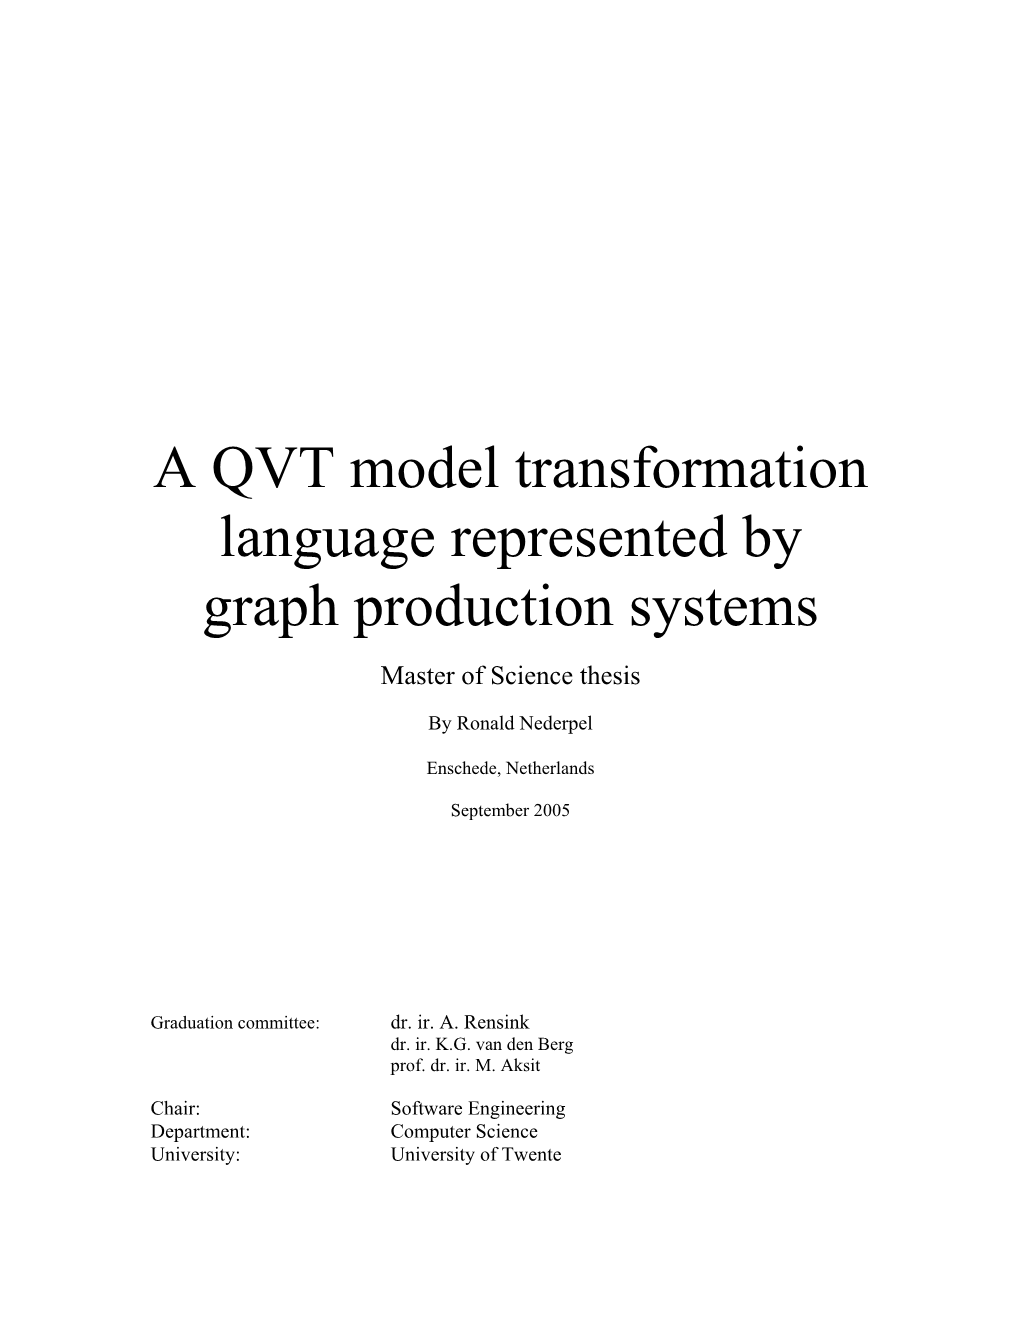 A QVT Model Transformation Language Represented by Graph Production Systems